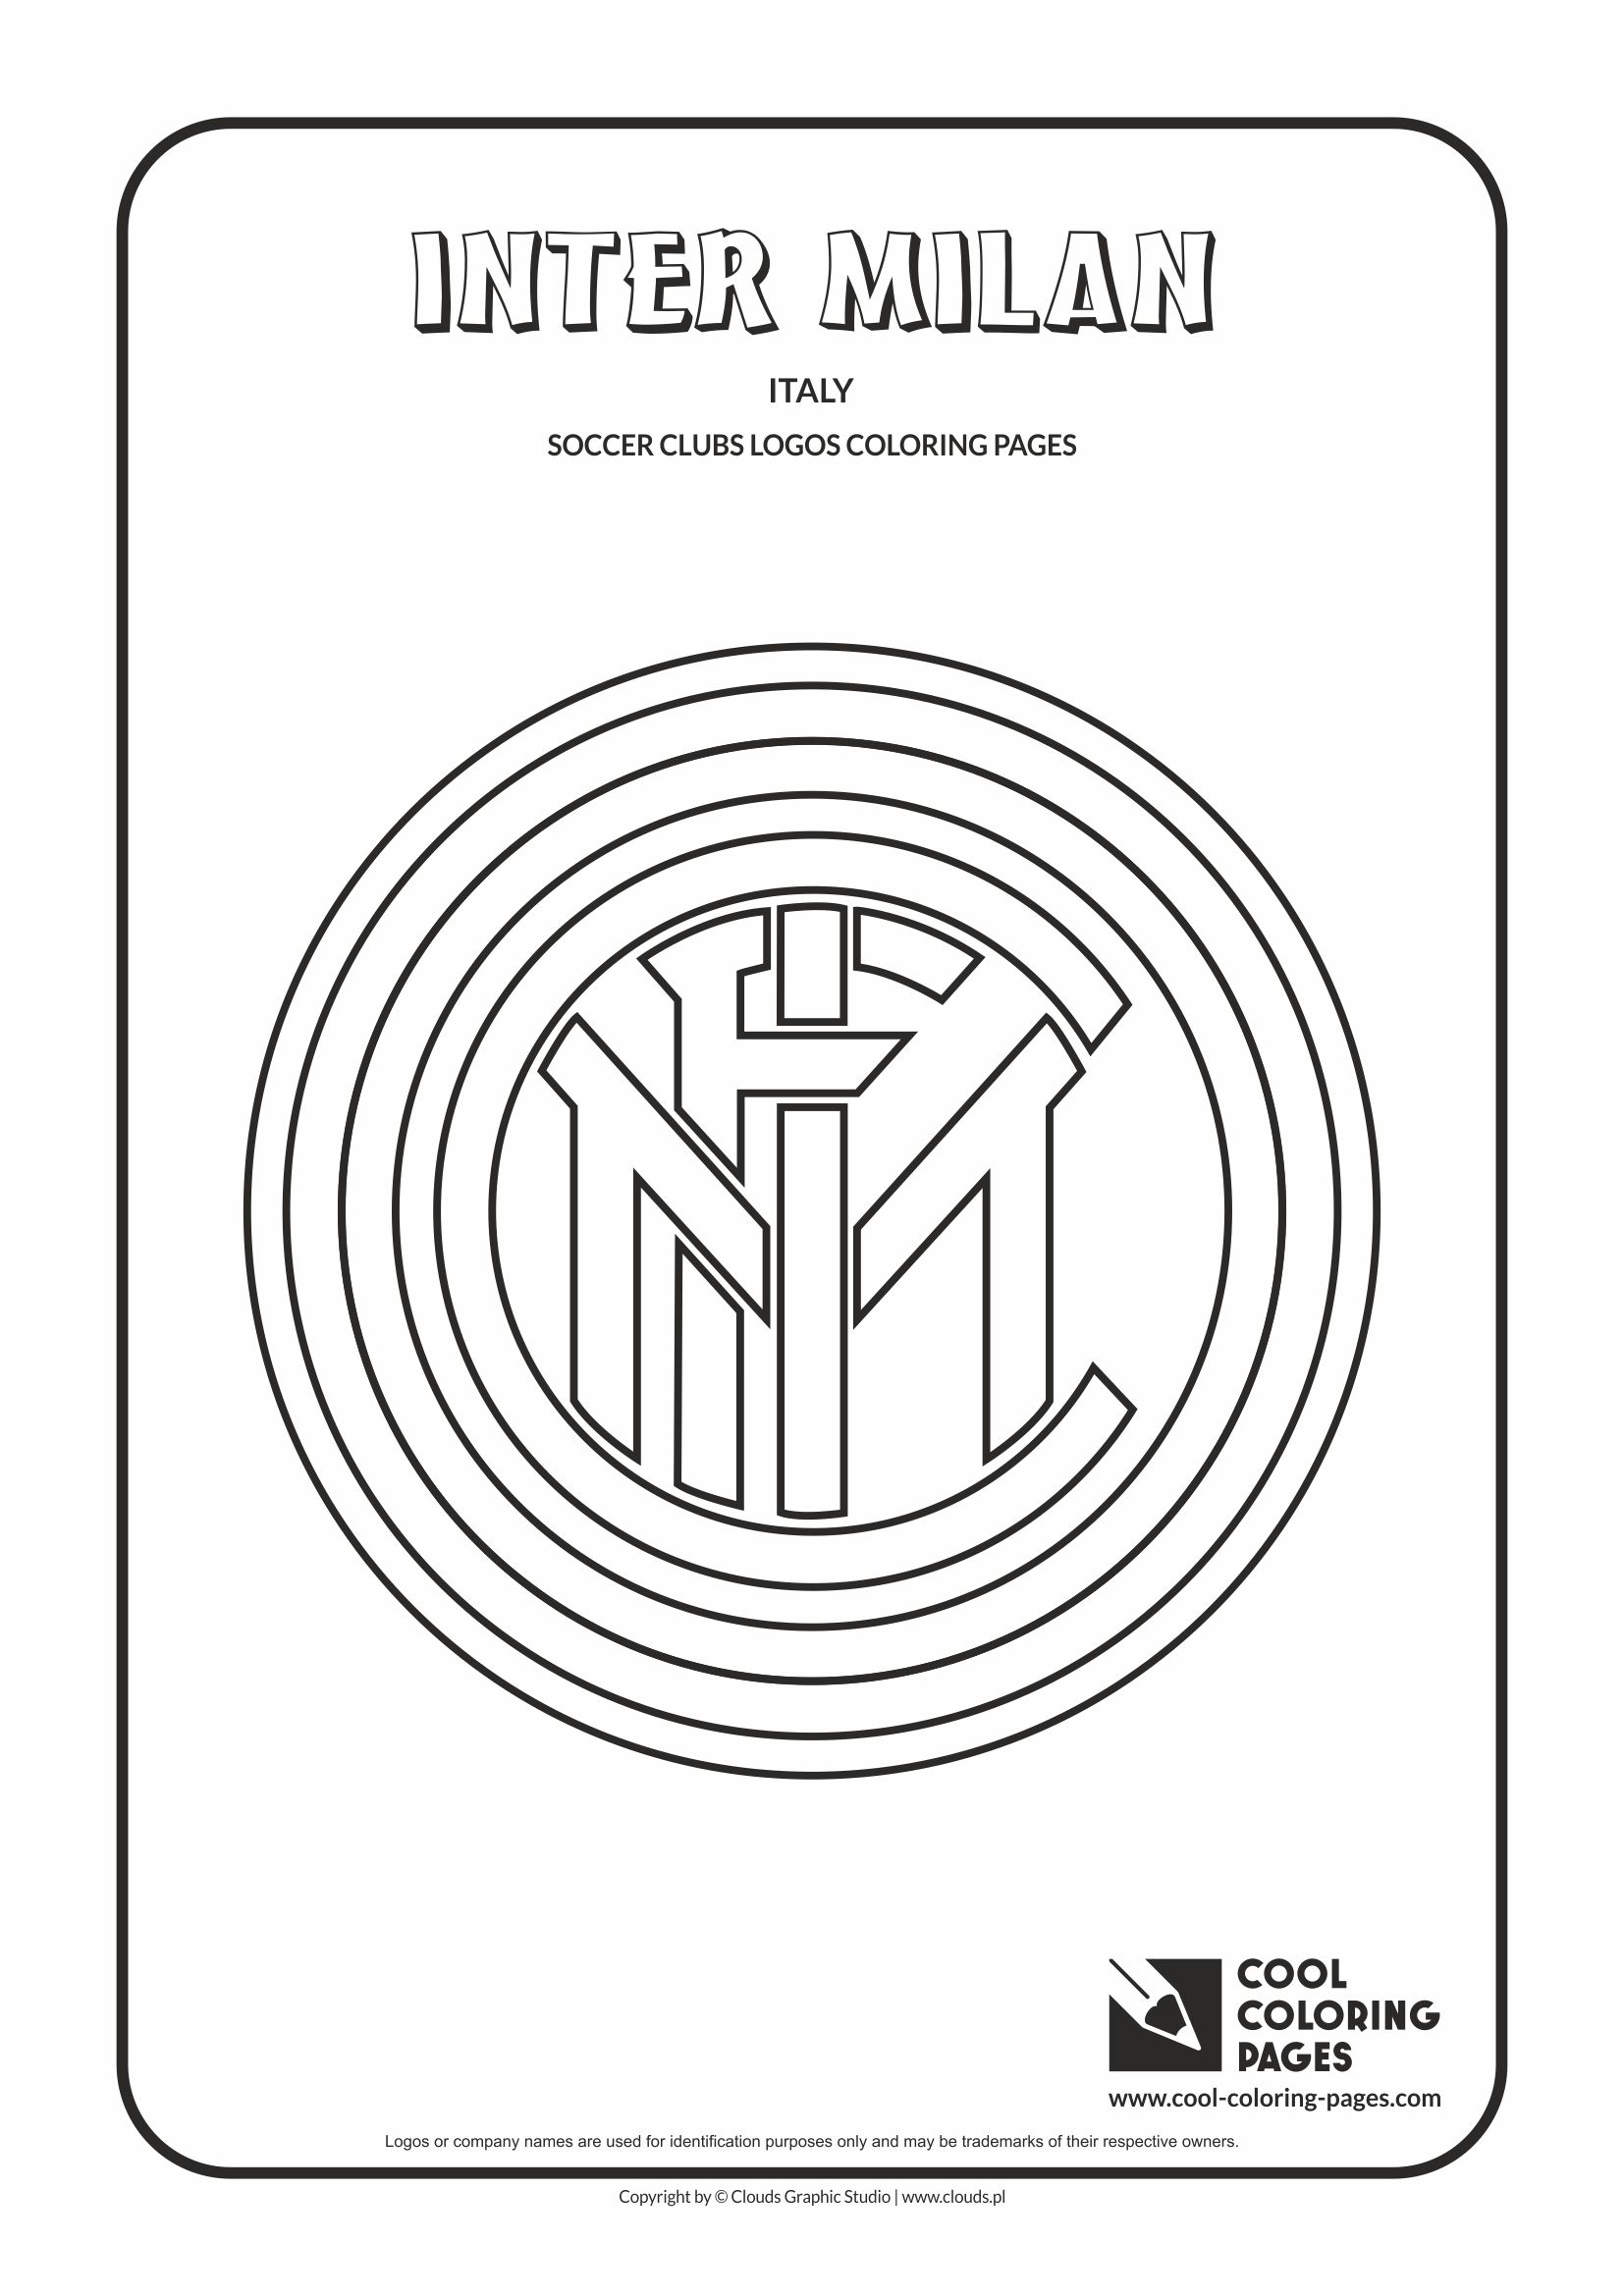 Cool Coloring Pages - Soccer Clubs Logos / Inter Milan logo / Coloring page with Inter Milan logo